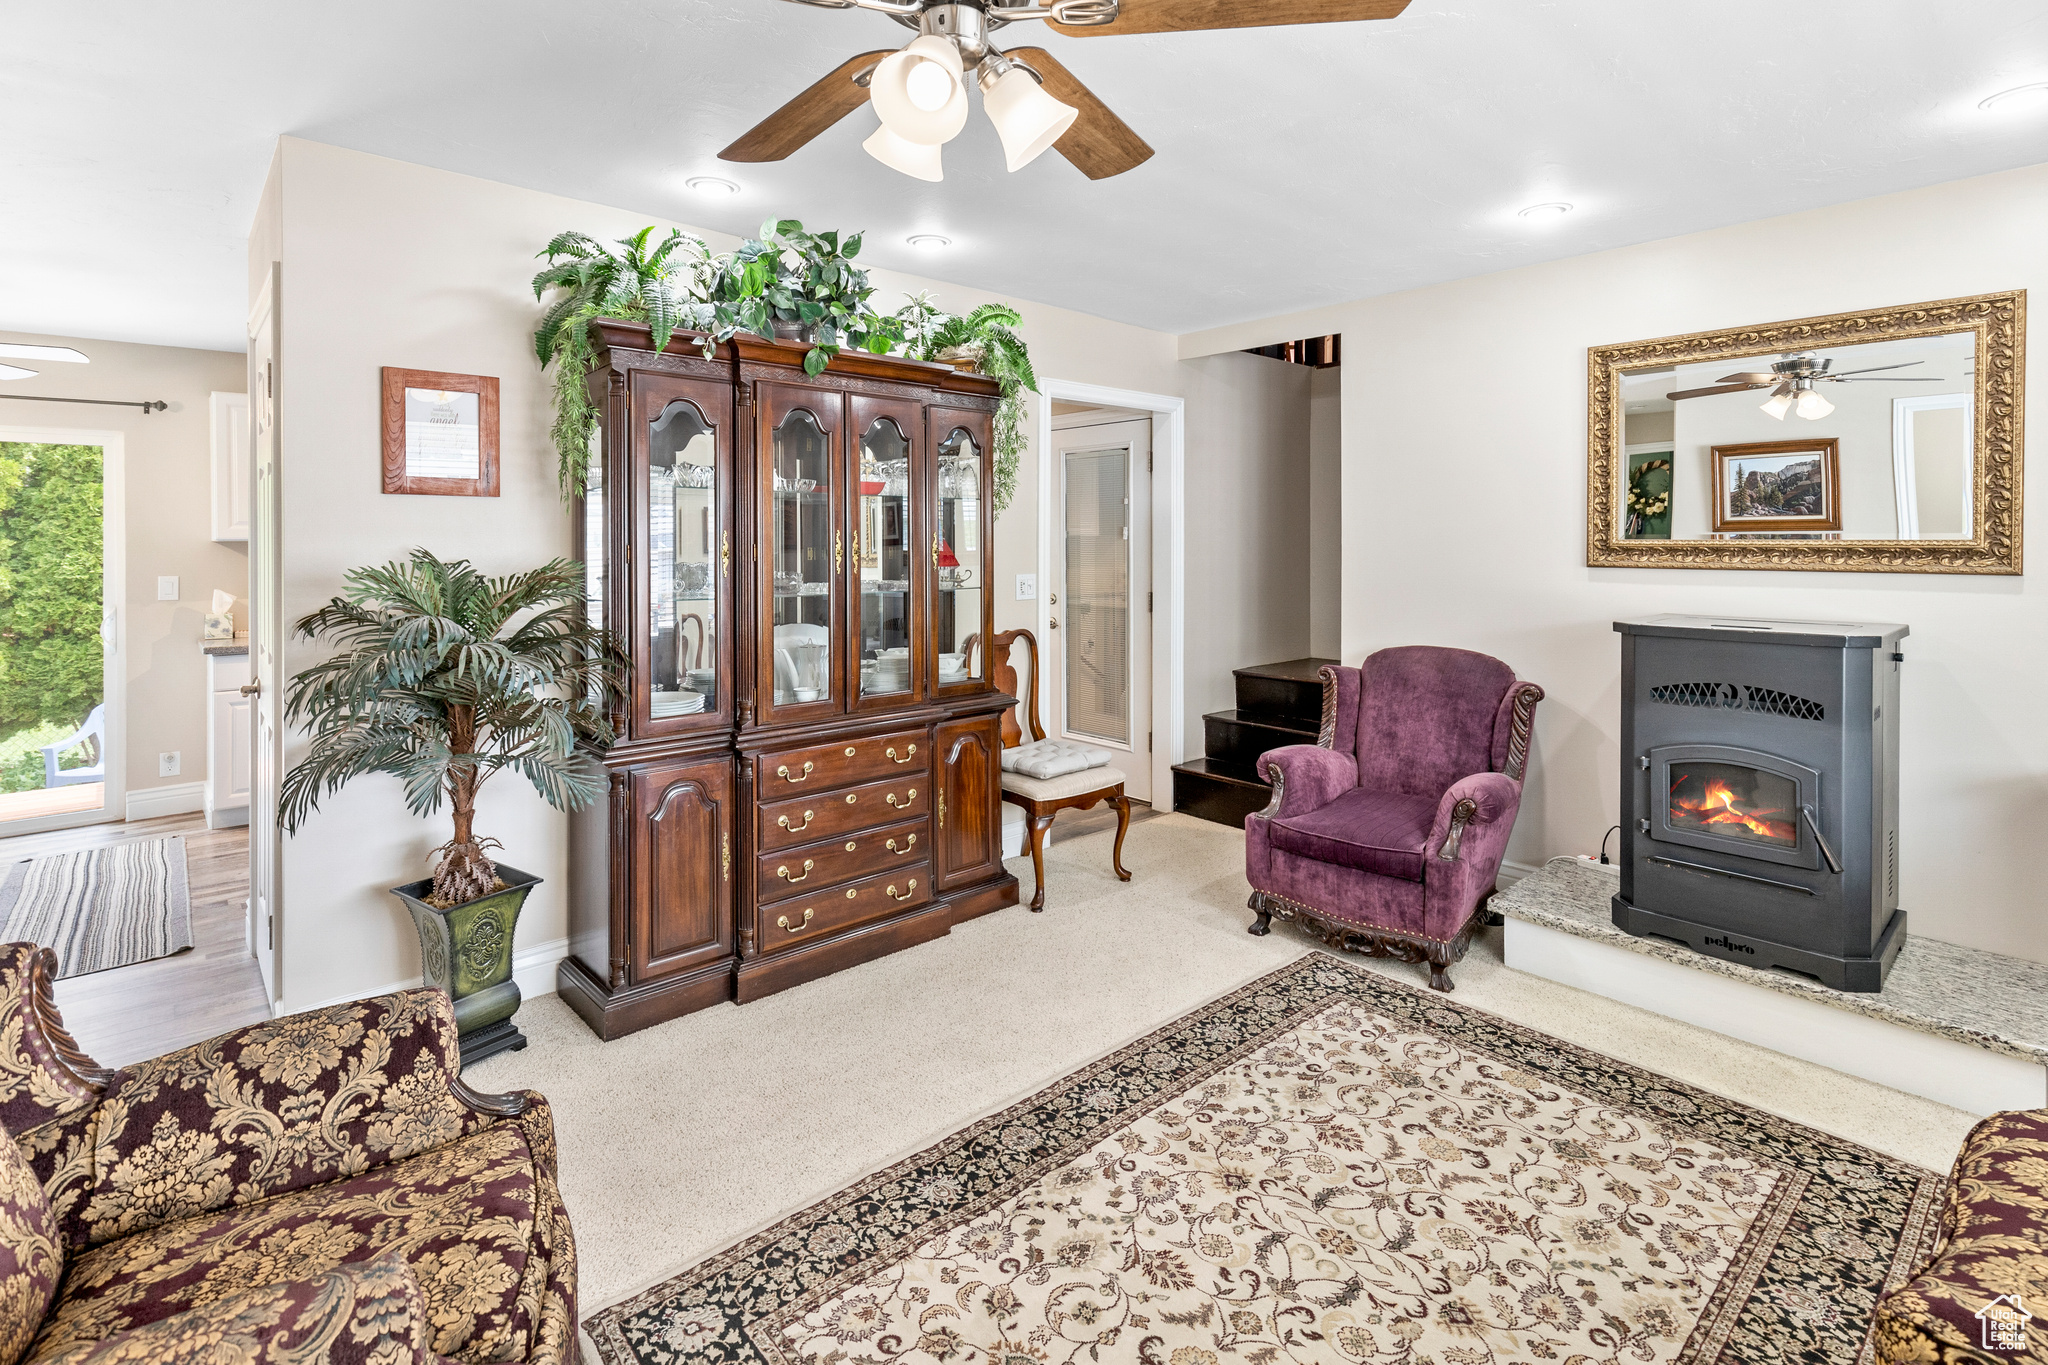 Carpeted living room featuring a wood stove and ceiling fan